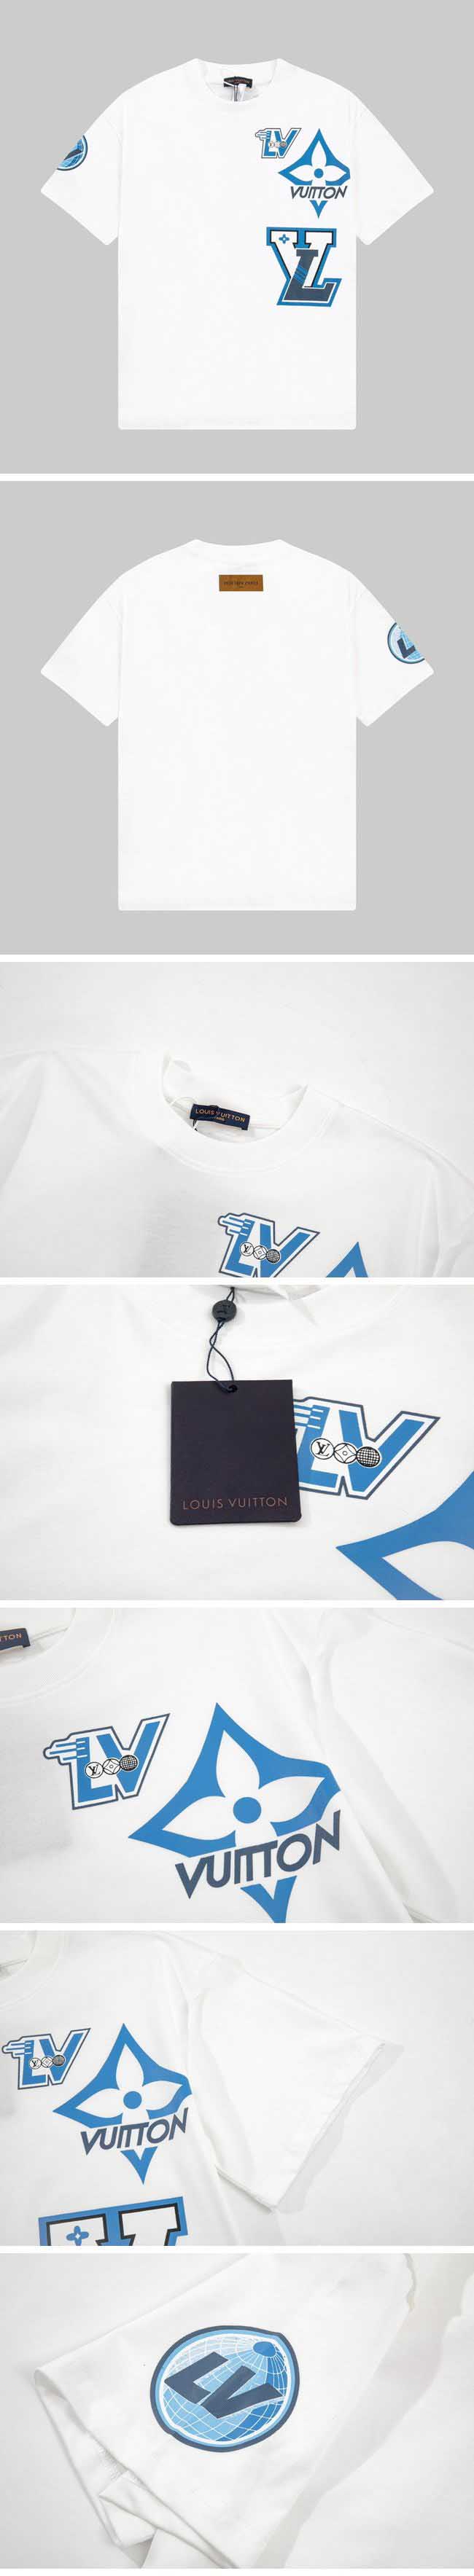 Louis Vuitton 23SS Print Design Tee ルイヴィトン 23SS プリント デザイン Tシャツ ホワイト